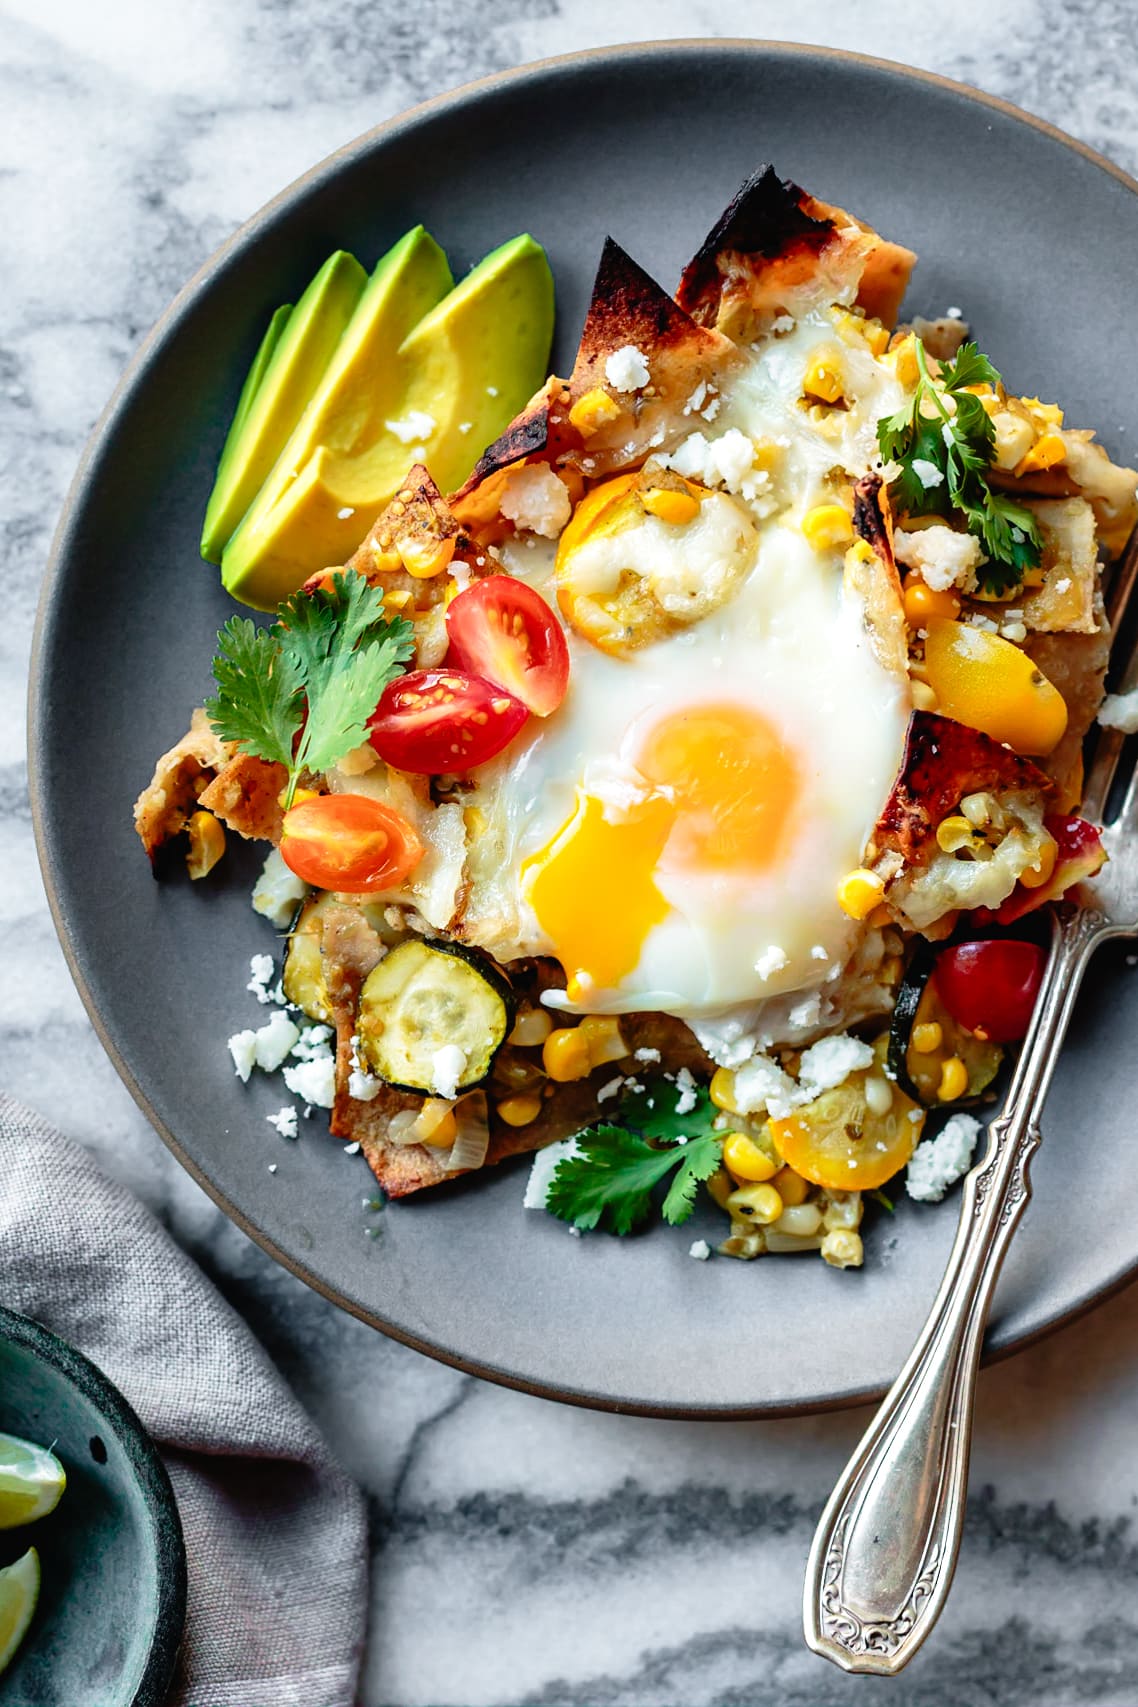 green chilaquiles with loads of veggies, avocado, and a runny baked egg